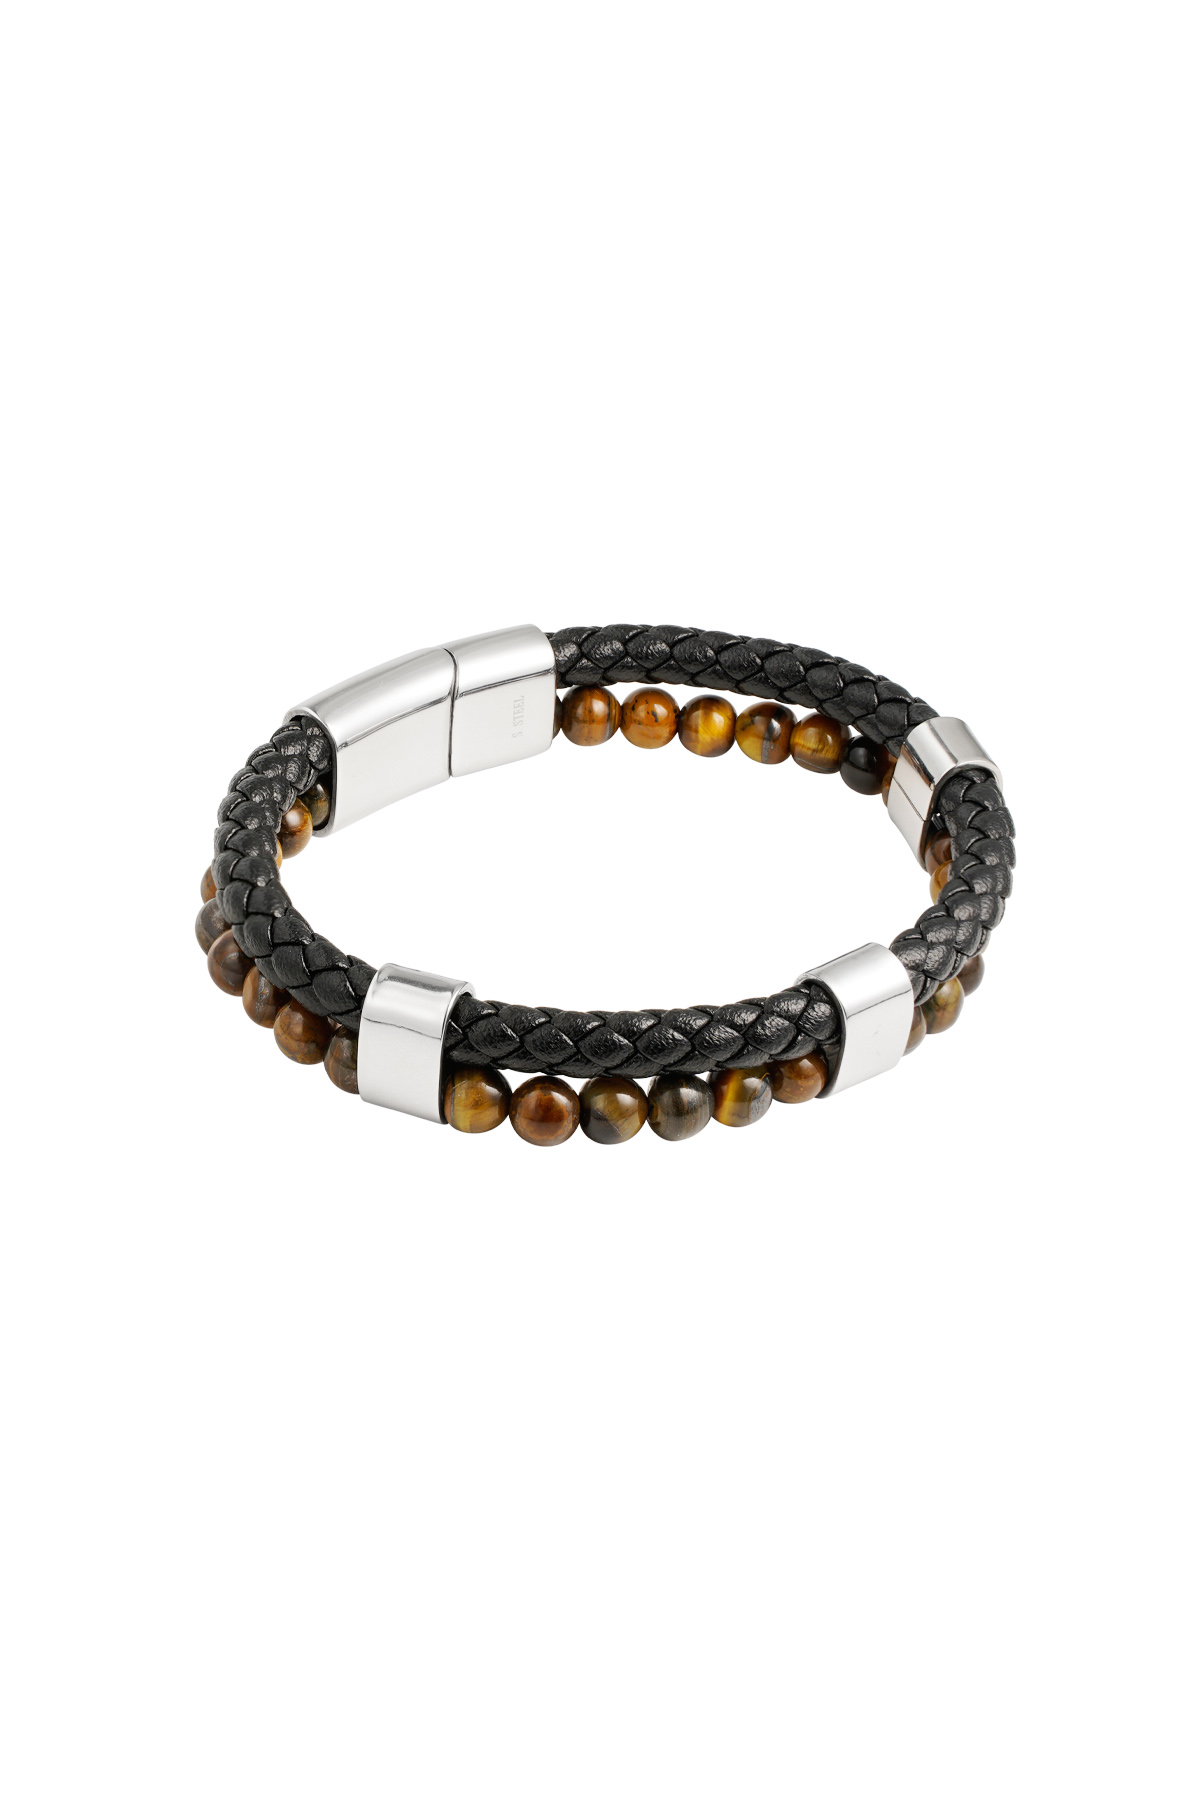 Men's bracelet double braid and beads - brown